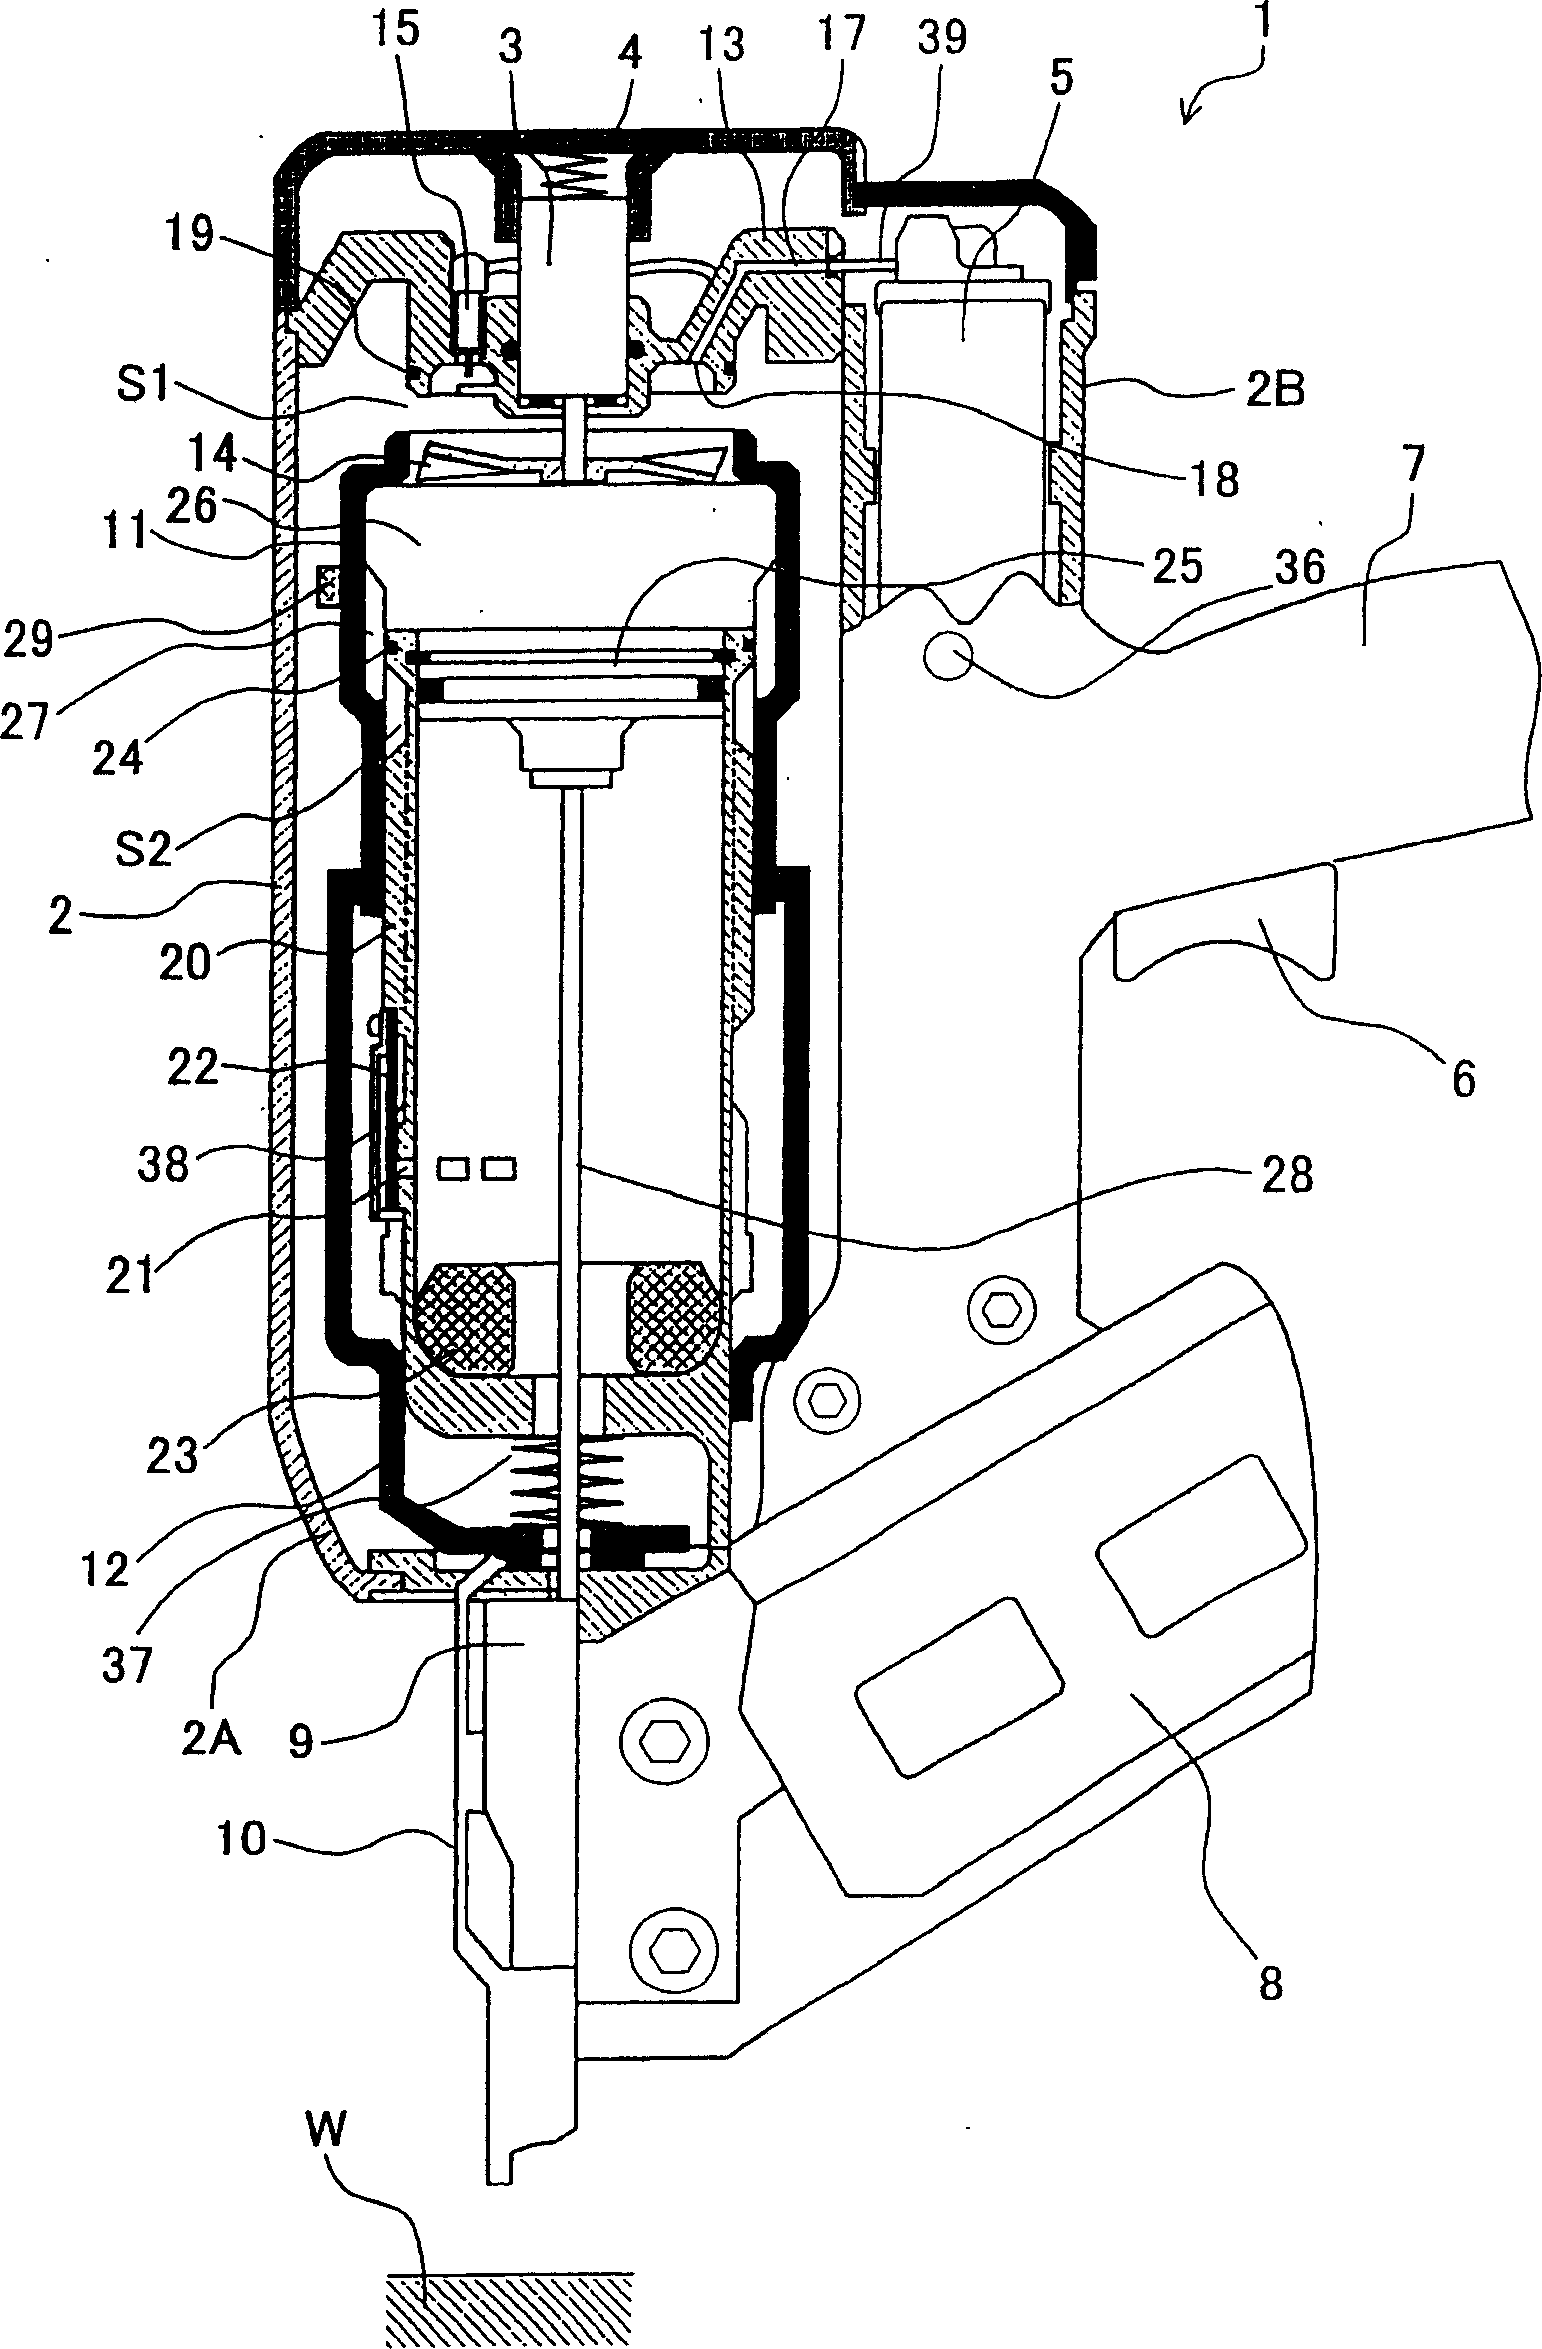 Barning type power tool with preventer for avoiding mechanical parts overheat in tools